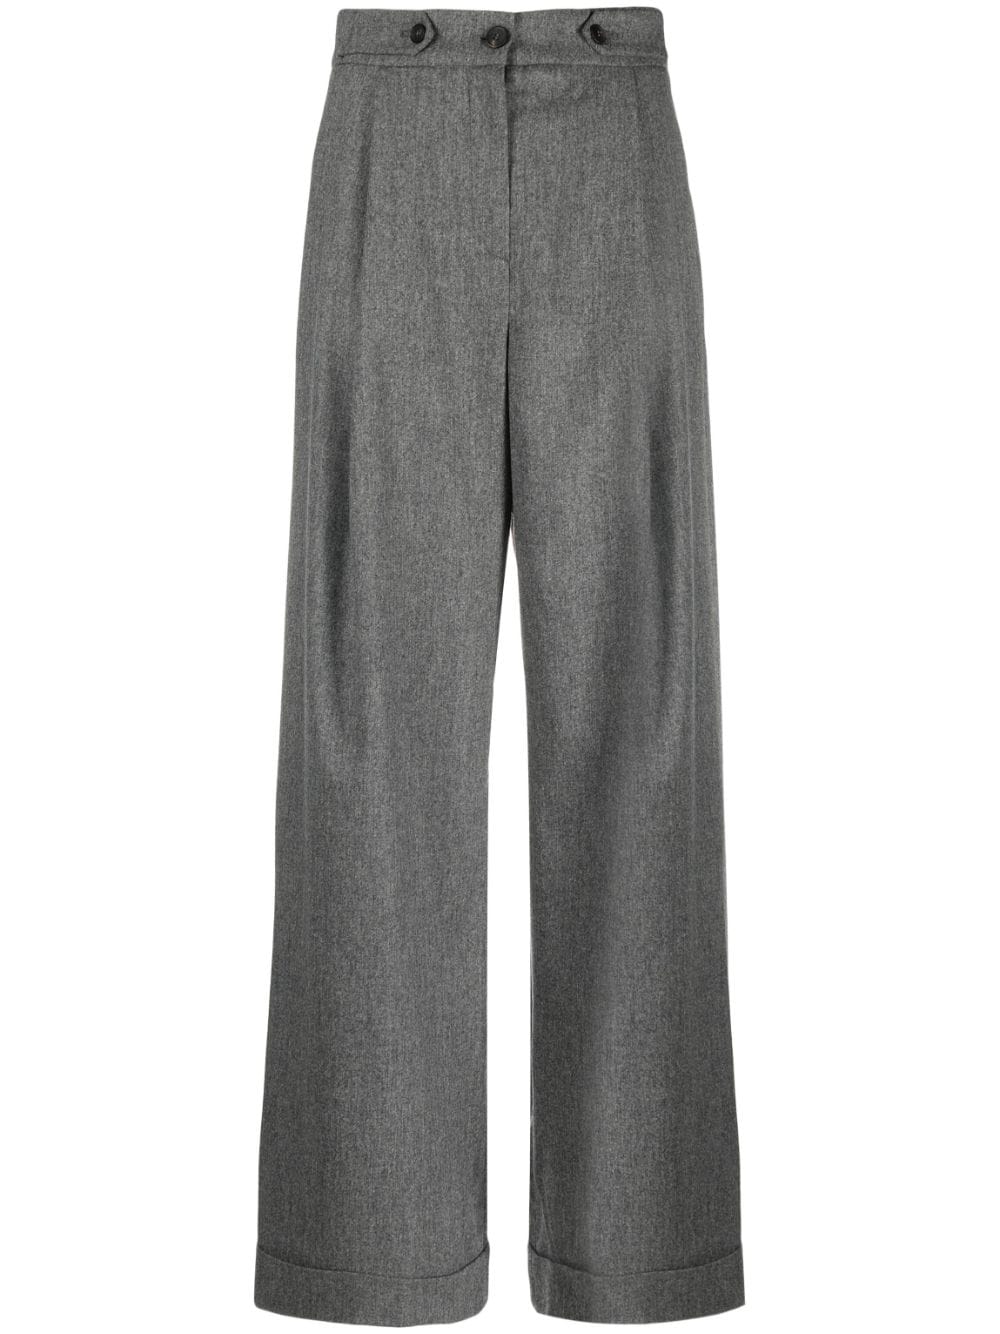 EMPORIO ARMANI TROUSERS WITH PENCES